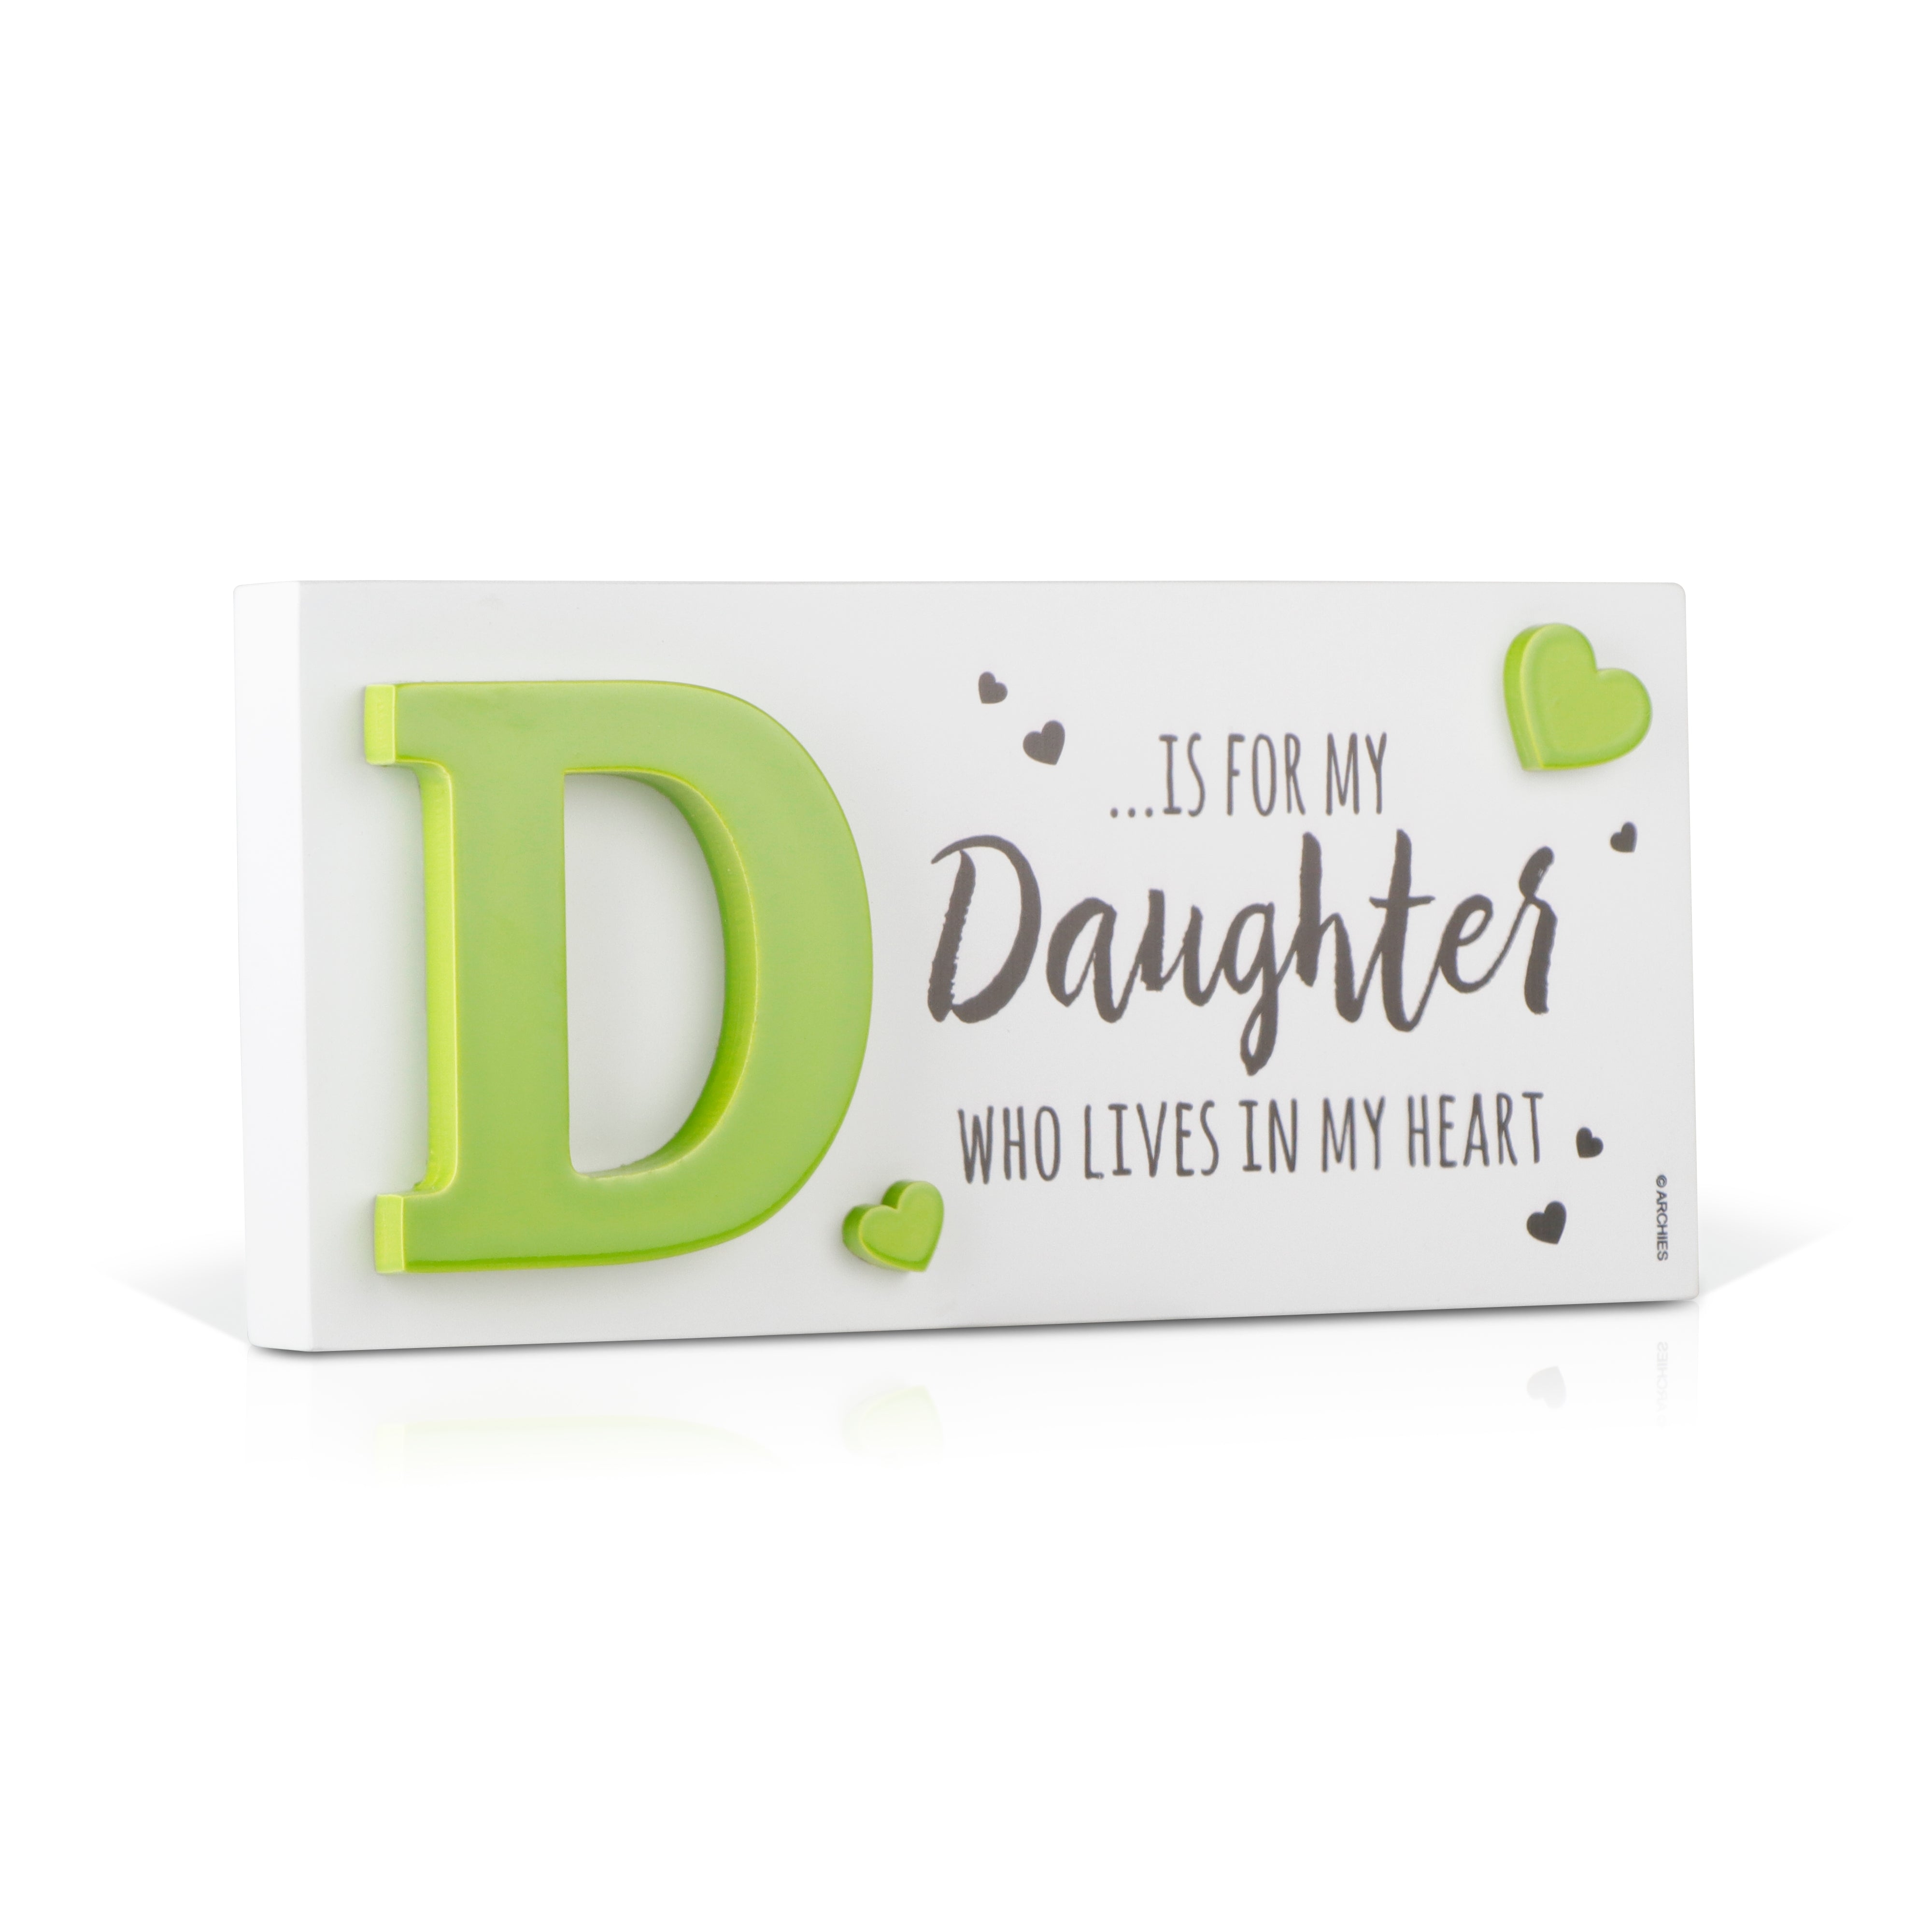 Archies | Archies KEEP SAKE Daughter Gift Combo with Ceramic Mug and Elevated Initial Quotation - with a FREE GREETING CARD 7